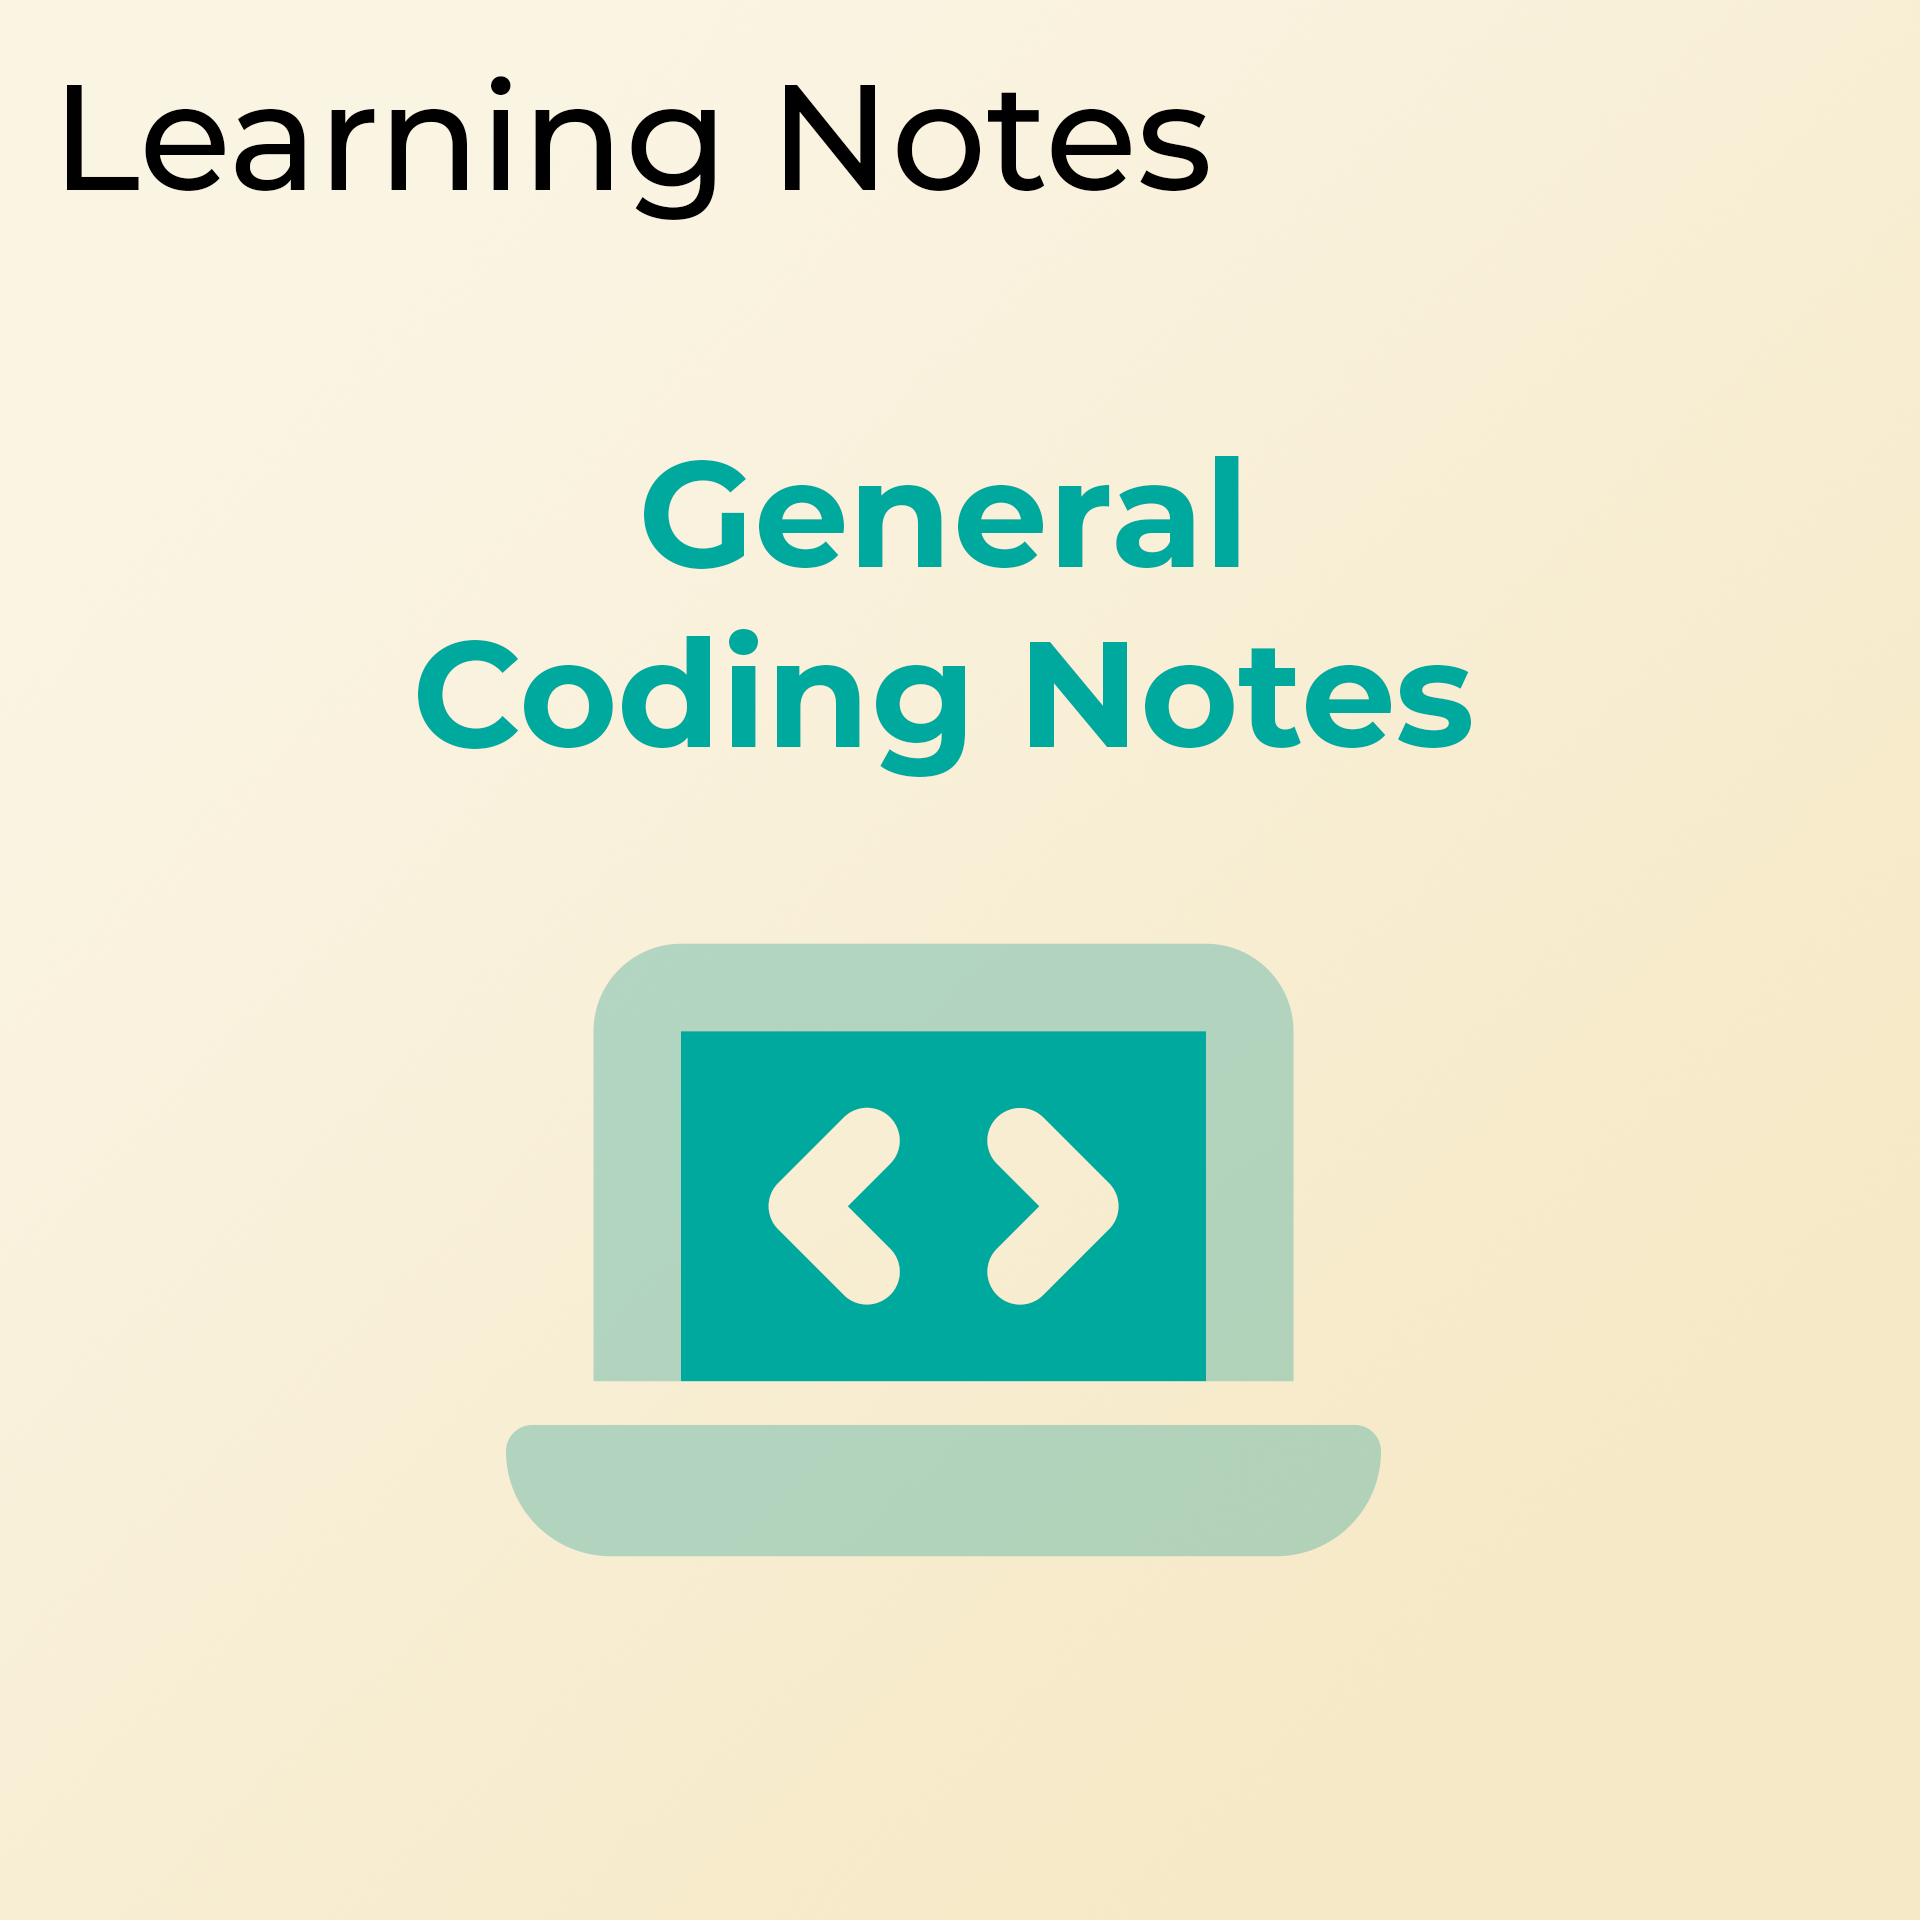 General Coding Notes